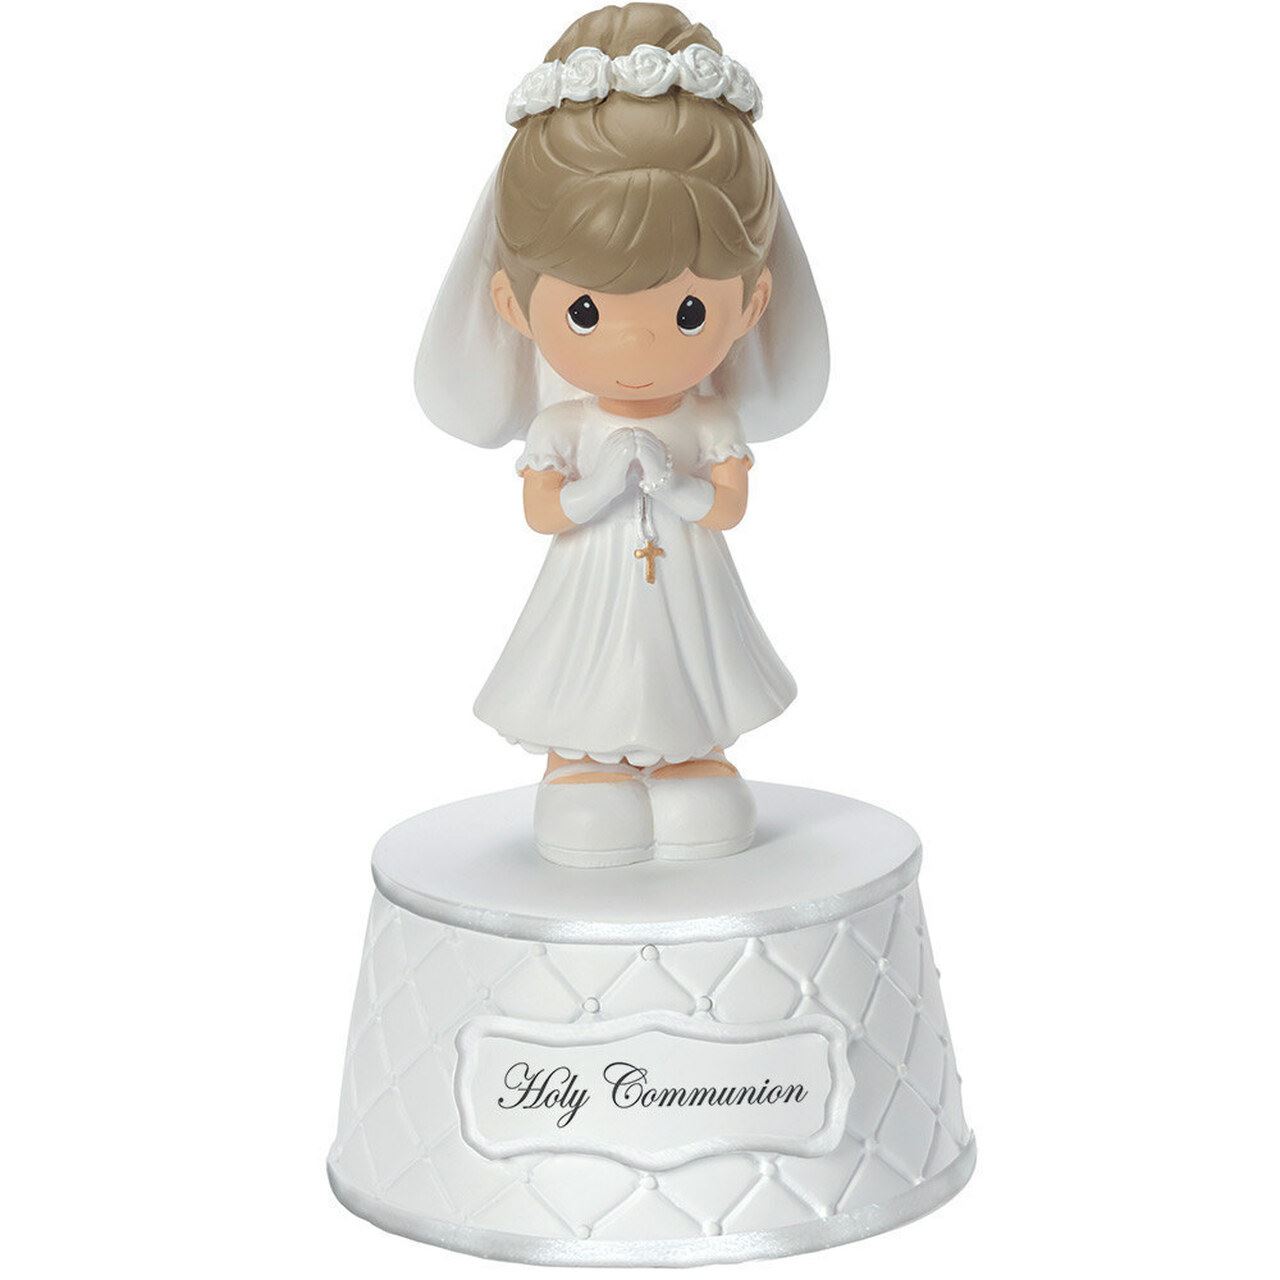 Precious Moments Girl First Holy Communion Music Box, Plays: The Lord’s Prayer